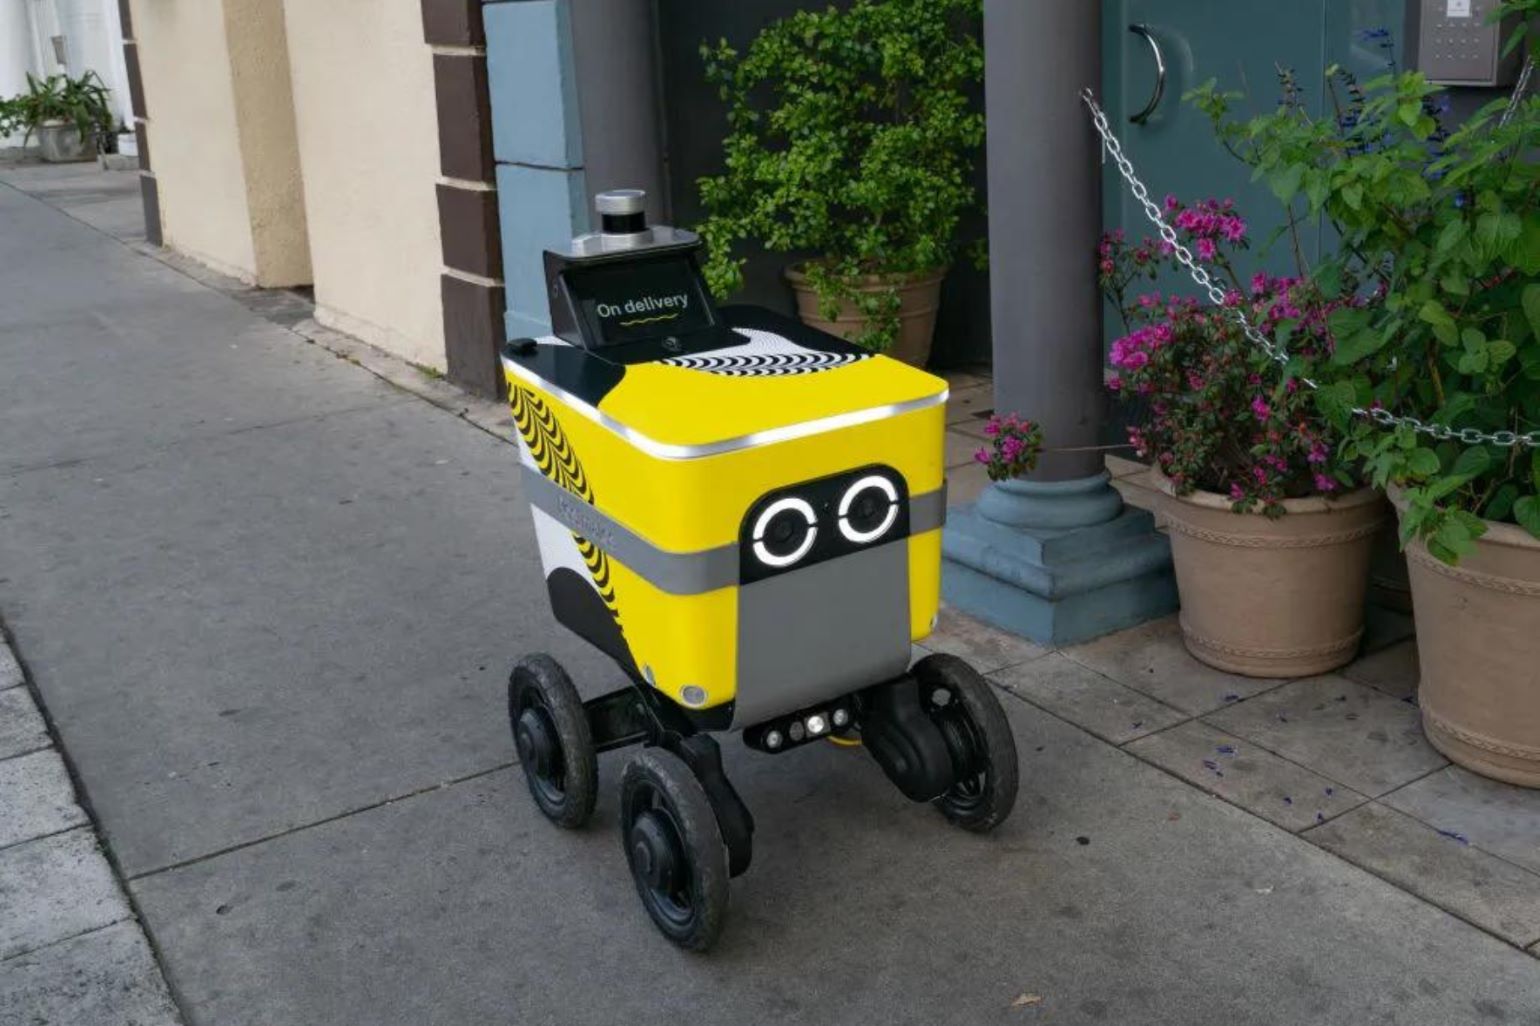 Delivery robots vs. Human Couriers, which is better